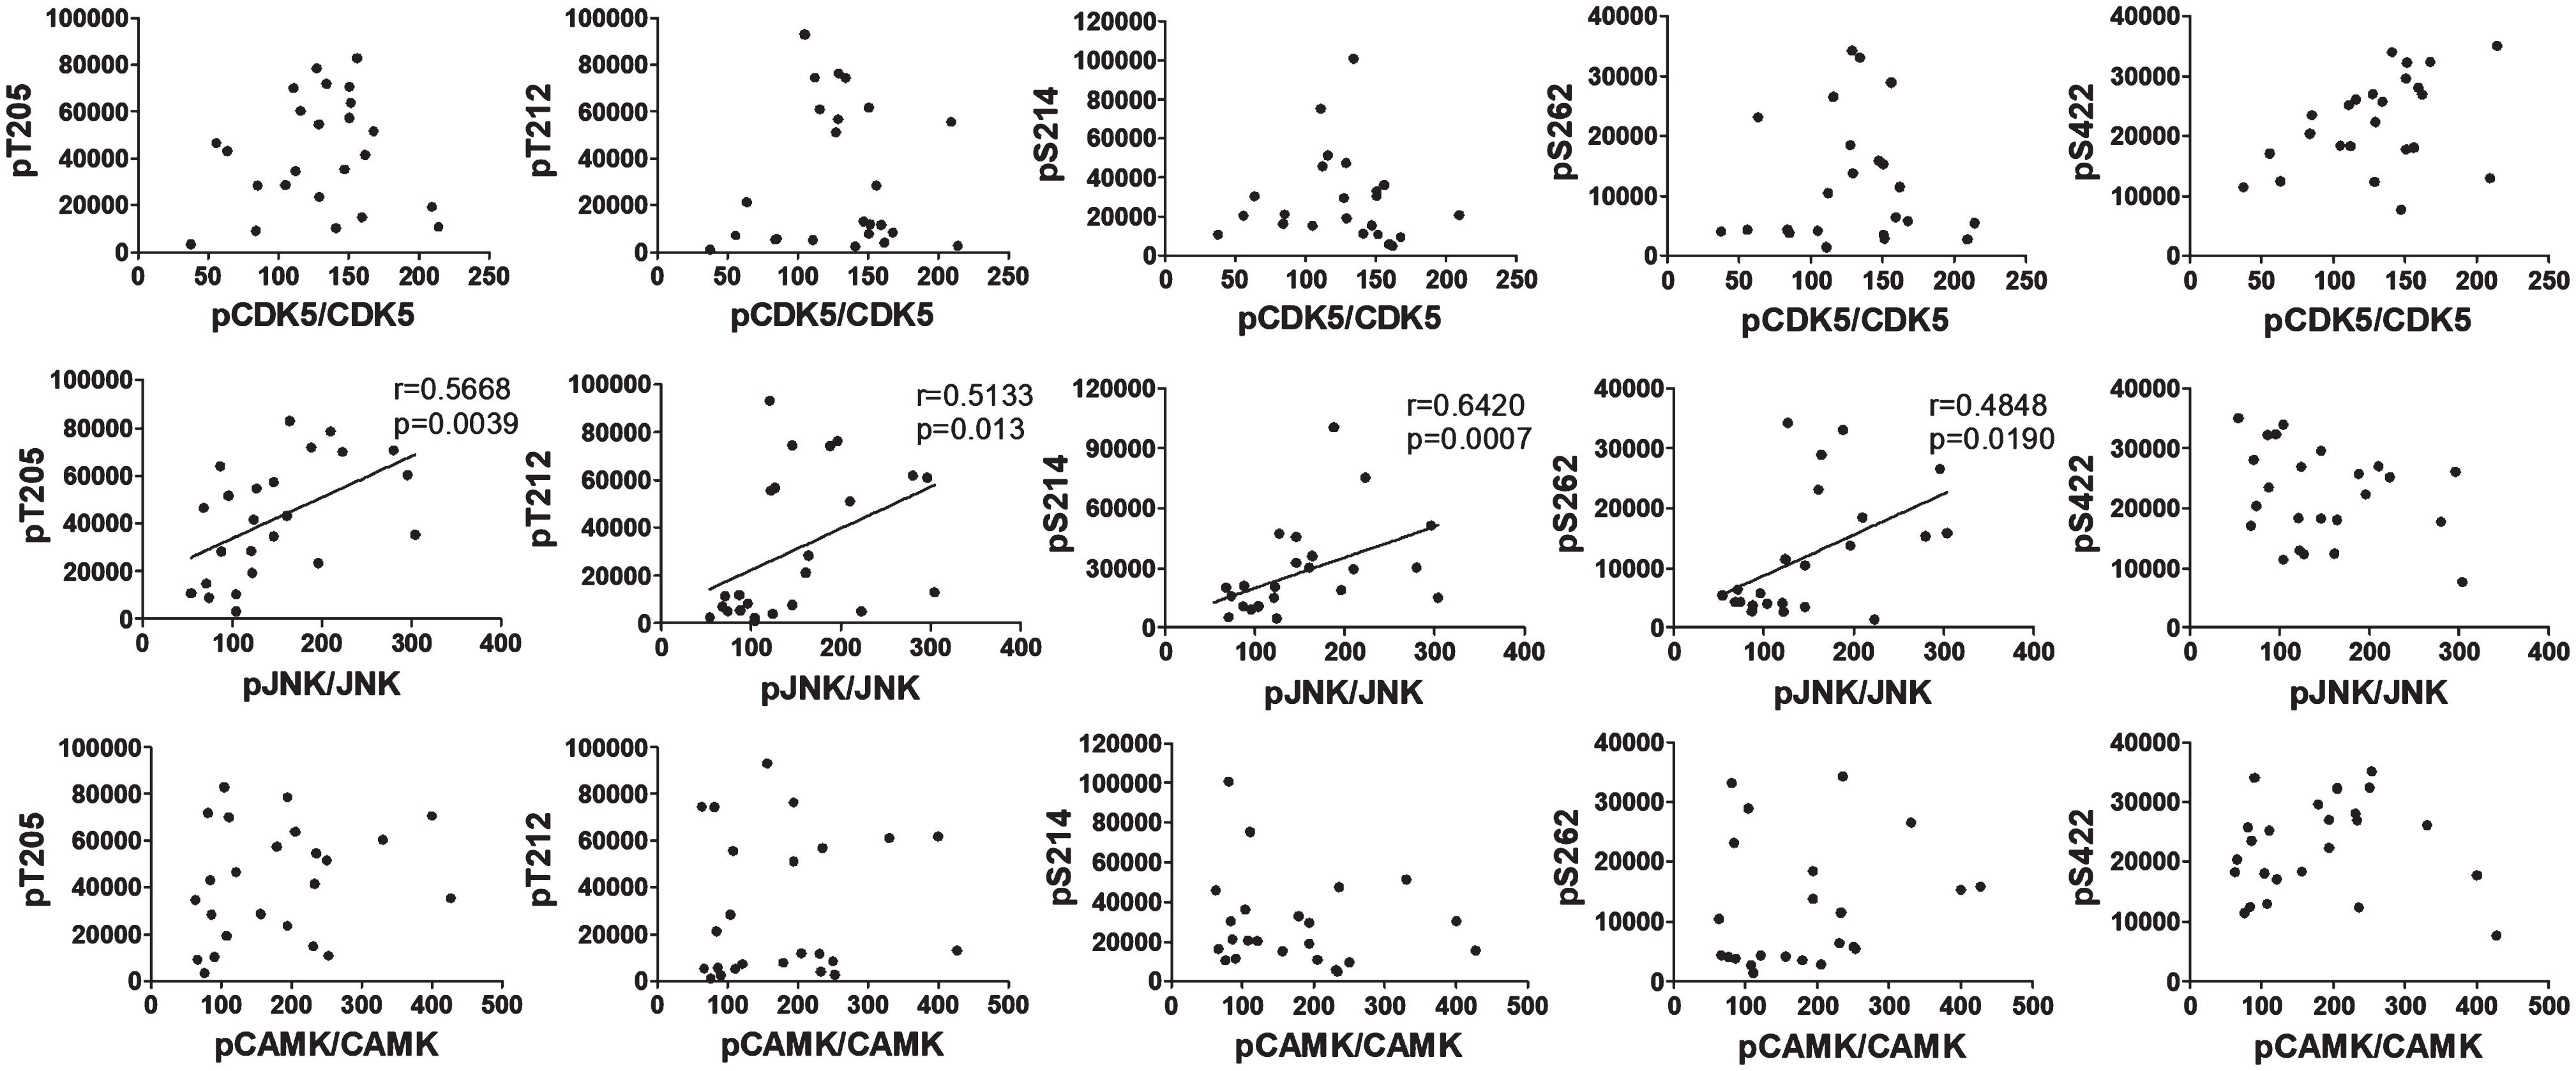 Correlation analysis between phosphorylation of tau and phosphorylation/activation of CDK5, JNK, and CAMK-II. The phosphorylation levels of tau at the indicated sites of brain samples were plotted against the phosphorylation/activation of CDK5, JNK, and CAMK-II and analyzed using Spearman correlation. The linear correlation lines, correlation coefficients (r values), and p values are included in the graphs only if they are statistically significant.